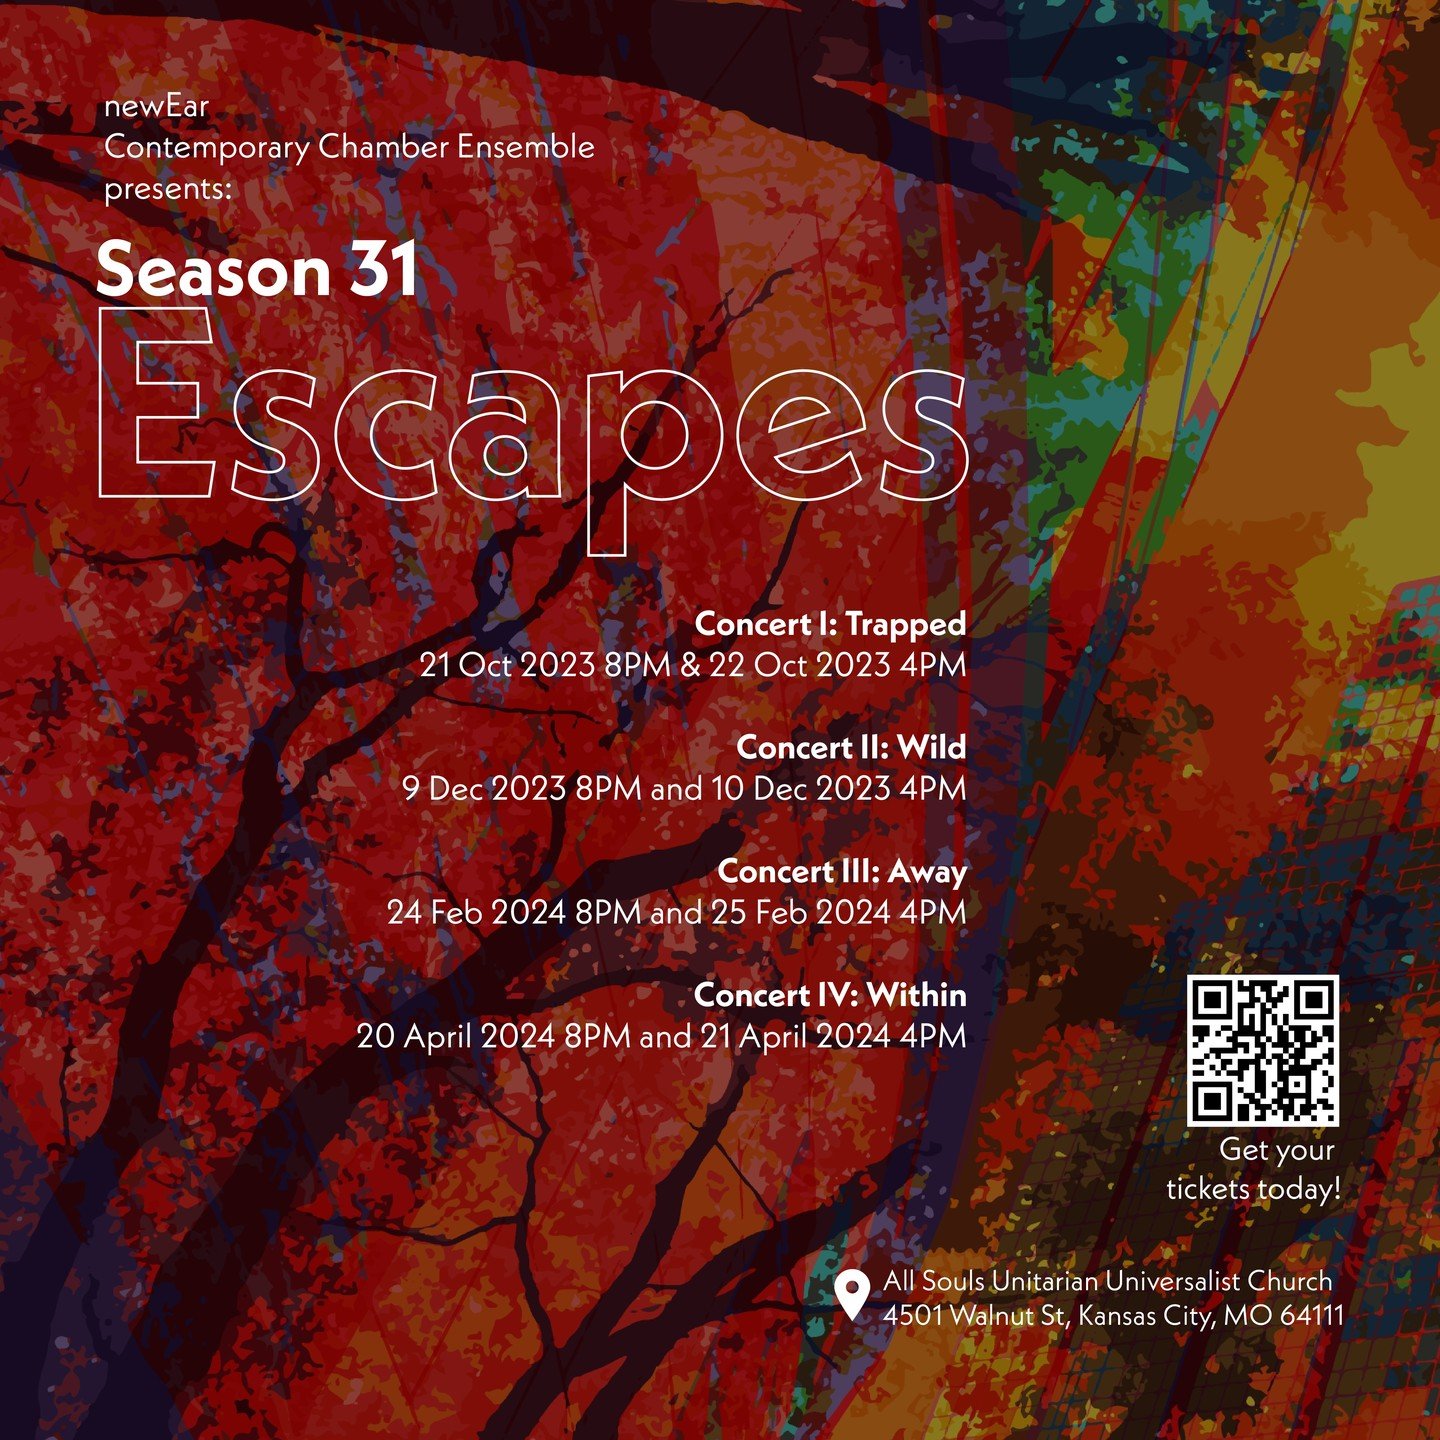 newEar Contemporary Chamber Ensemble is proud to present
Escapes.

🎶 For our thirty-first season, we return to the stage to share new music with in-person audiences. We hope you join us for the most meaningful season yet.

Get your tickets today: ht